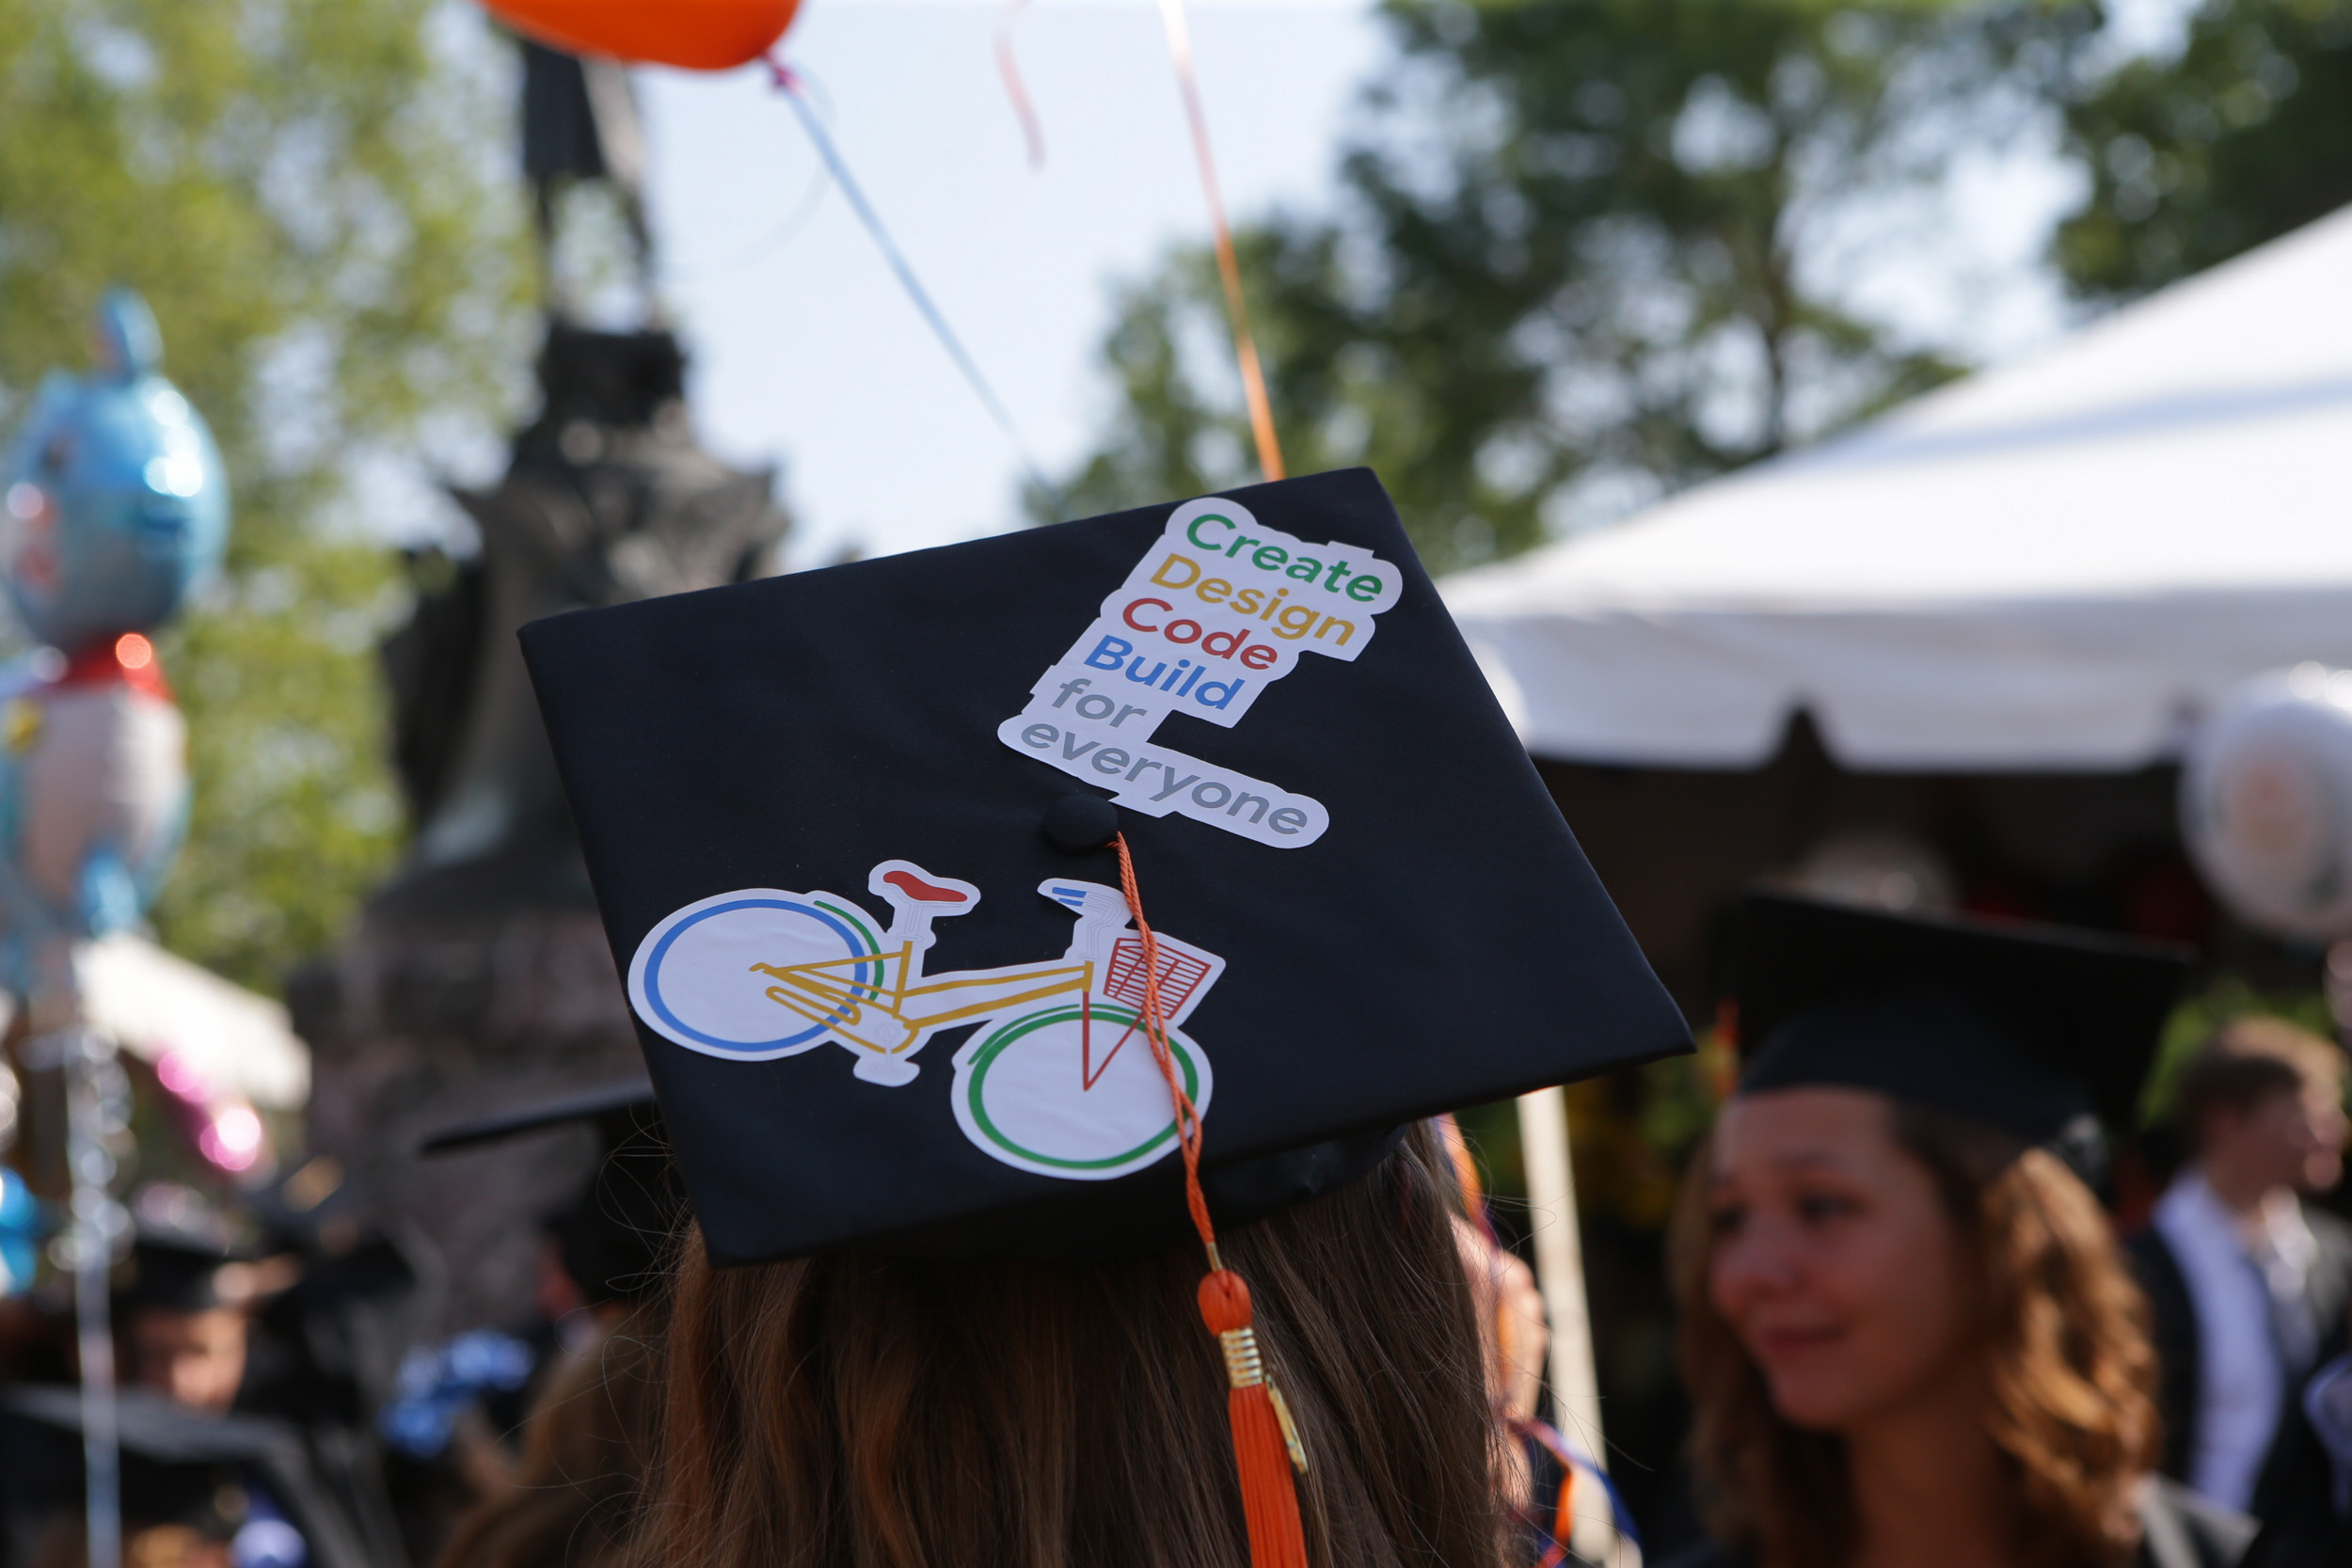 Graduation cap that reads Create Design code build for everyone with a multicolored bicycle